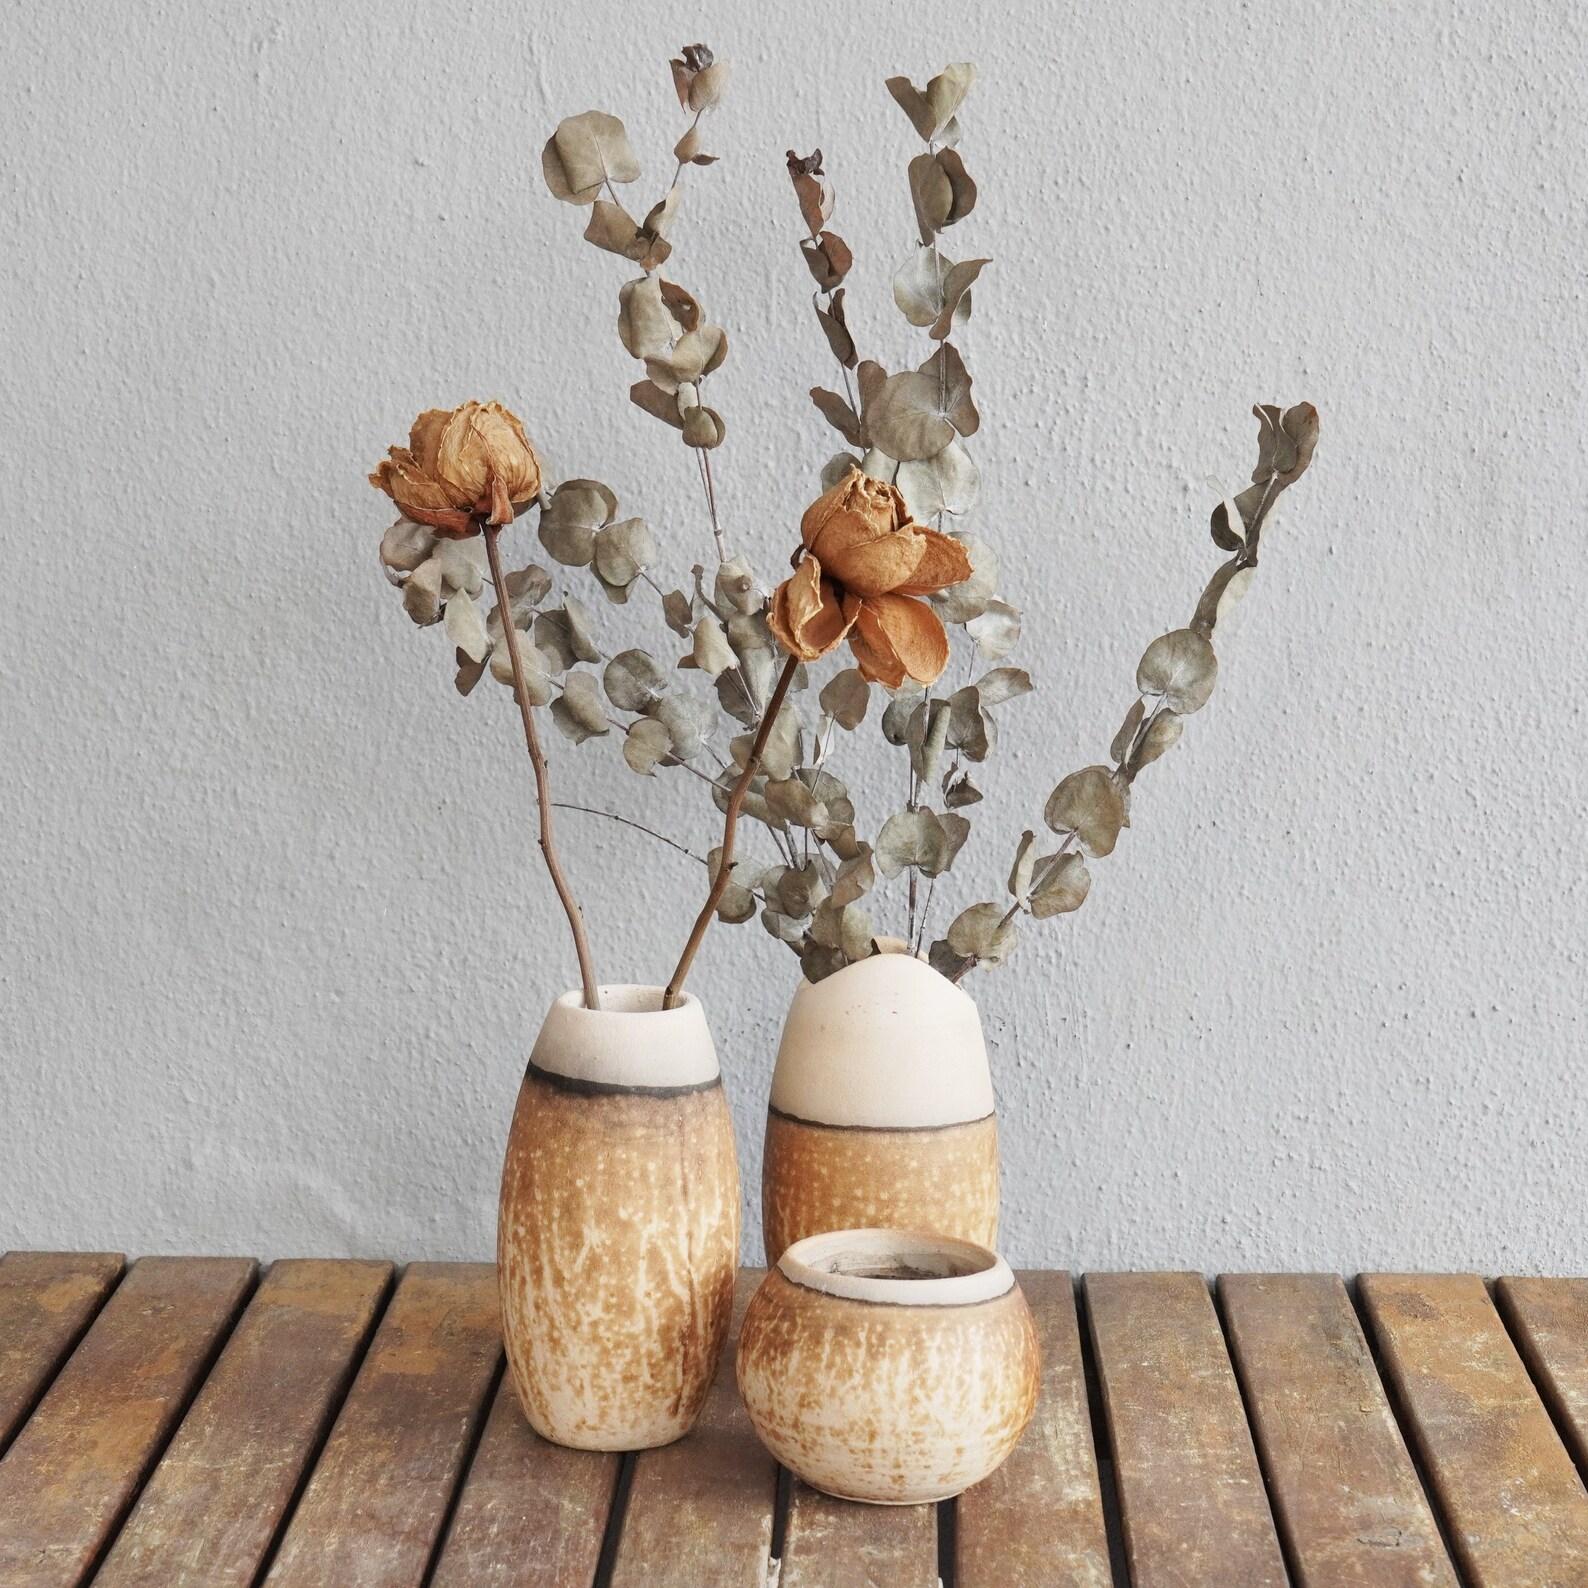 Make her smile with the sweetest surprise & brighten up her birthday with our ceramic décor set. 

*Does not come with dried flowers.

You get : 

1 Tsuri vase
1 Koi vase
1 Zen vase

Tsuri ( ツリー ) ~ (n) tree

Our Tsuri vase is based on the classic